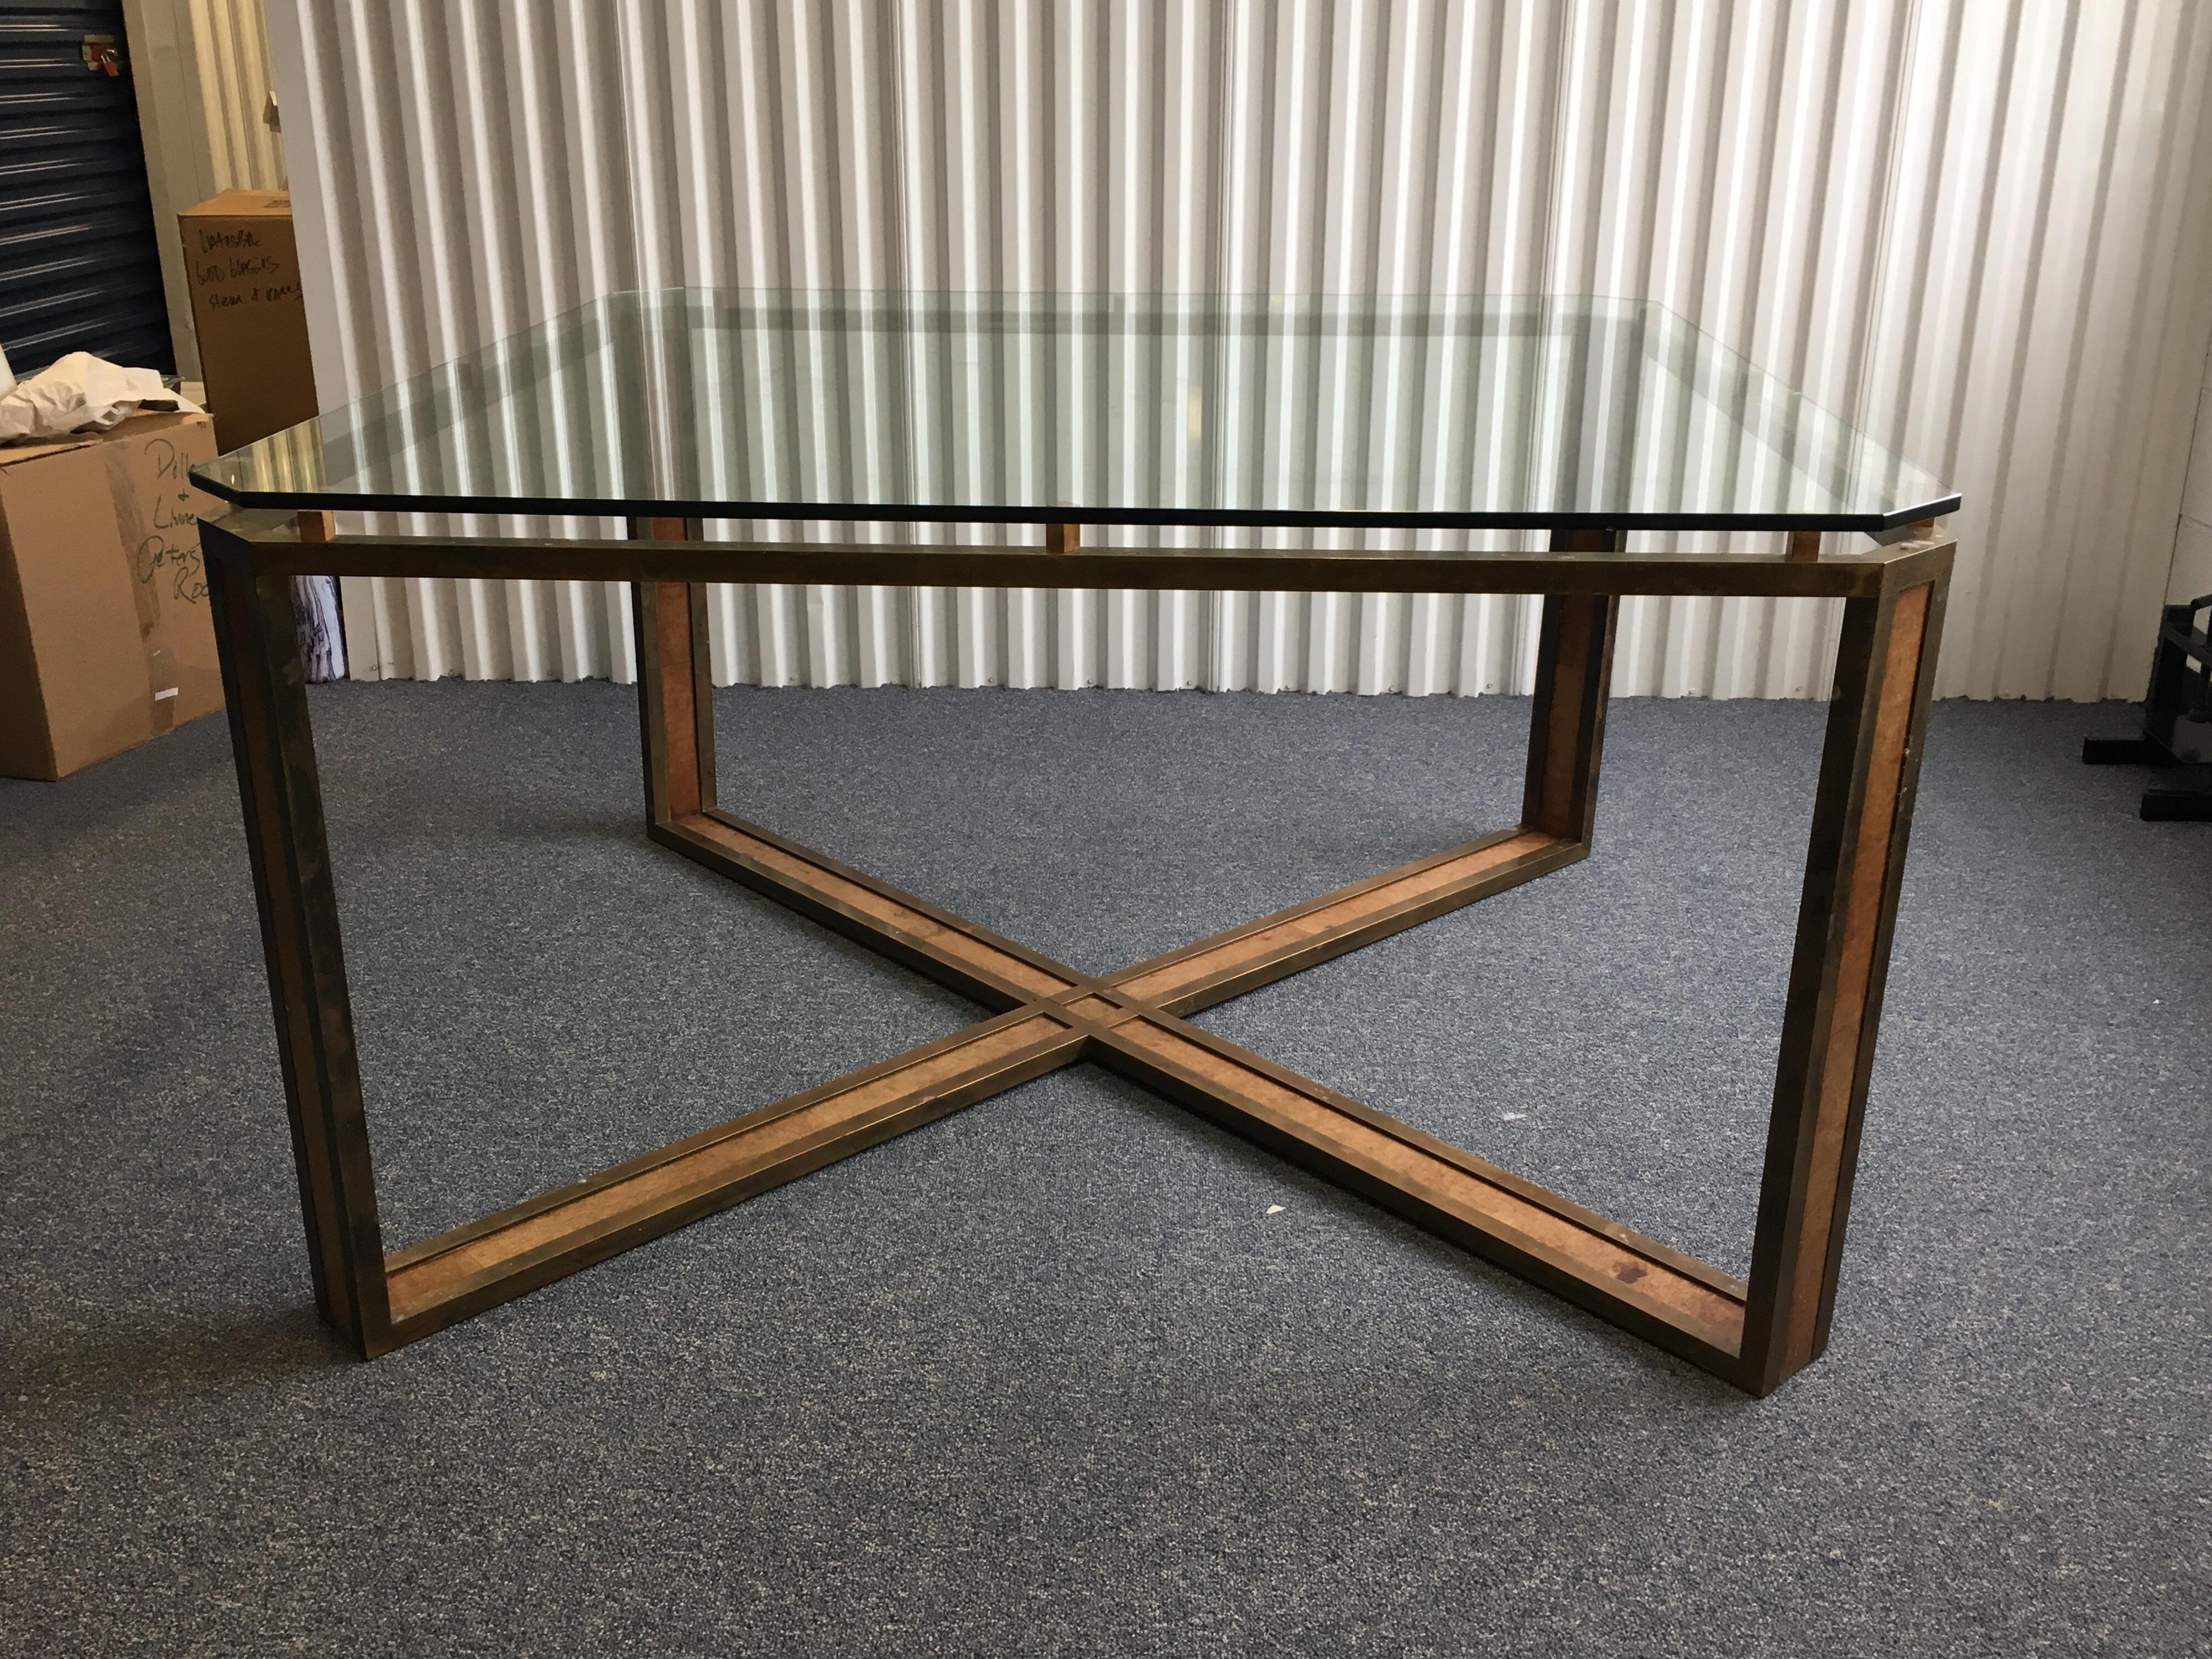 Large square Midcentury X-base brass and leather table with glass top. Brass frame with inlaid leather. Leather wrapped squares hold glass top. Great looking piece. Glass has some scratches, leather is faded and brass has aged. Structurally sound.